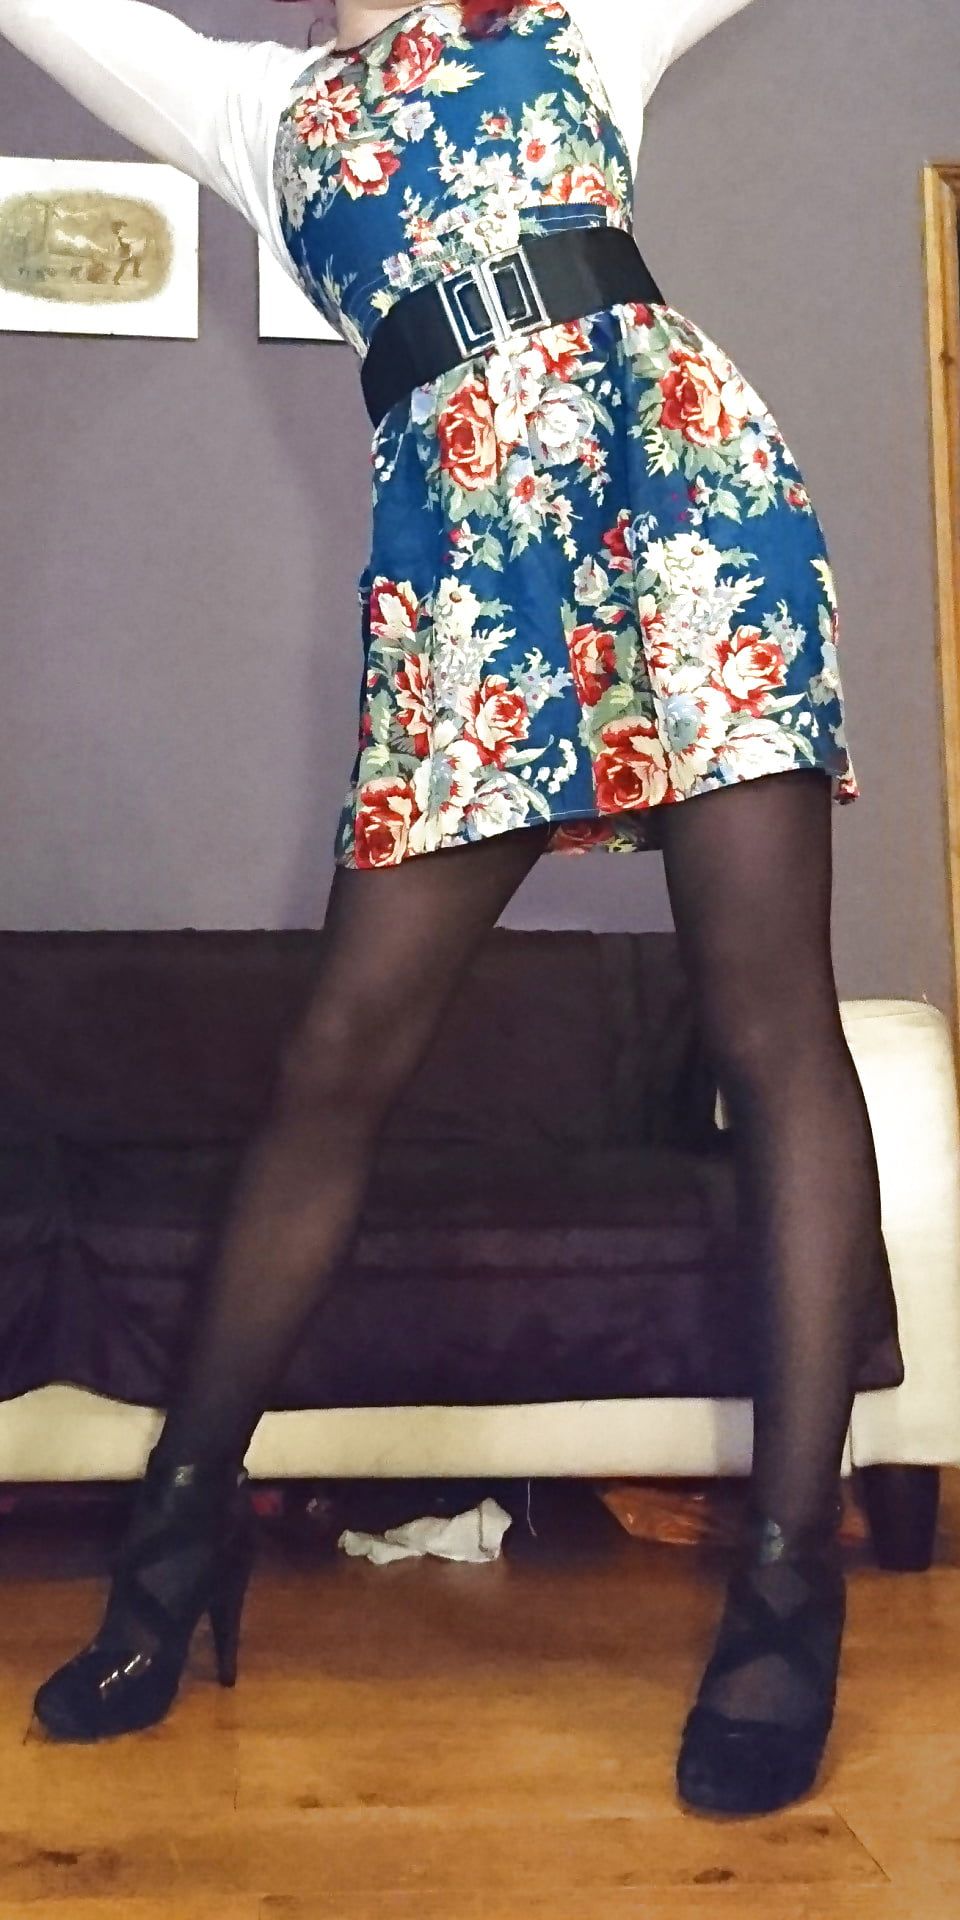 Marie crossdresser in opaque pantyhose and floral dress #5